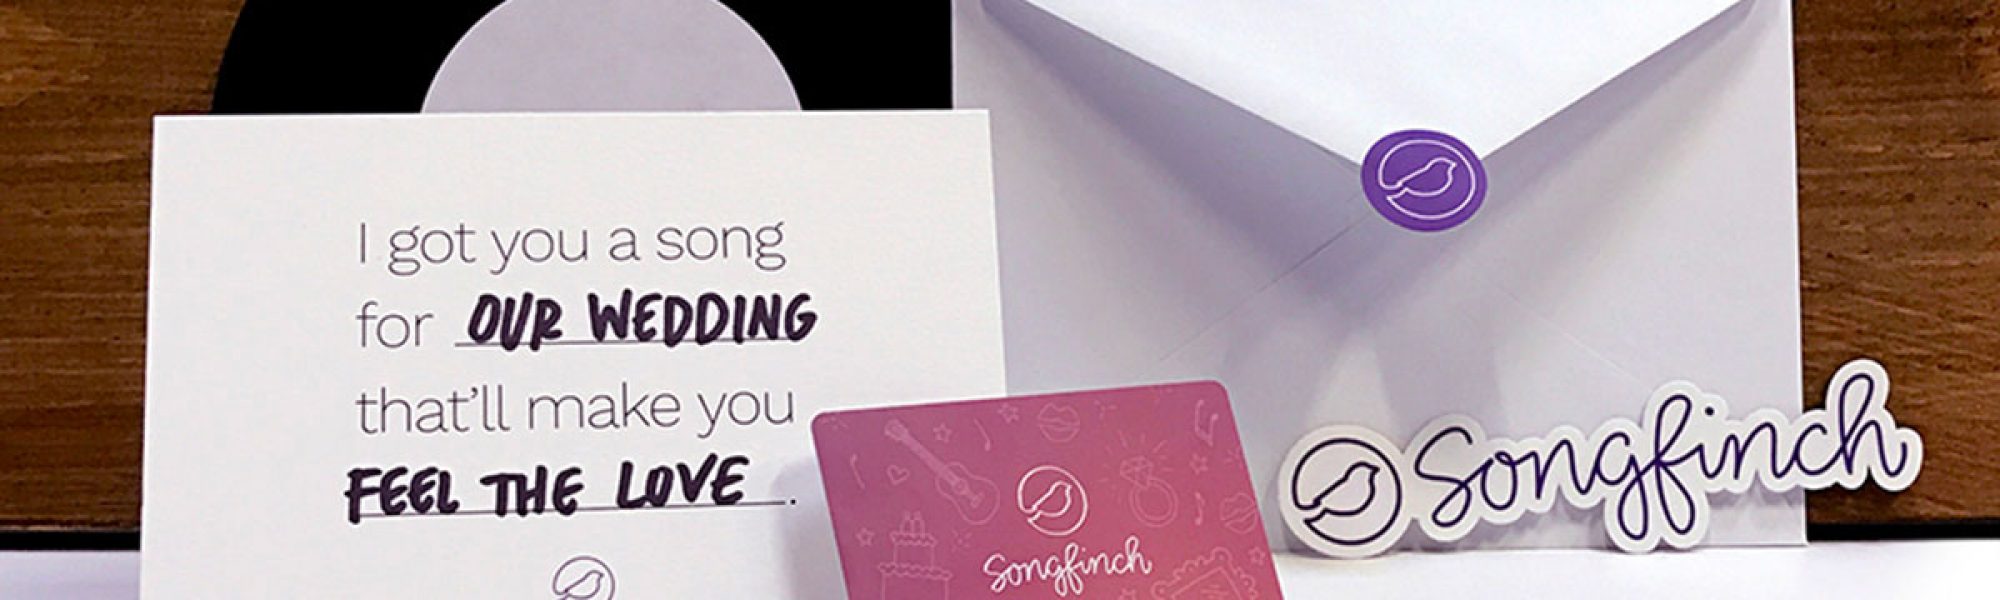 Songfinch customized songs for the bride and groom